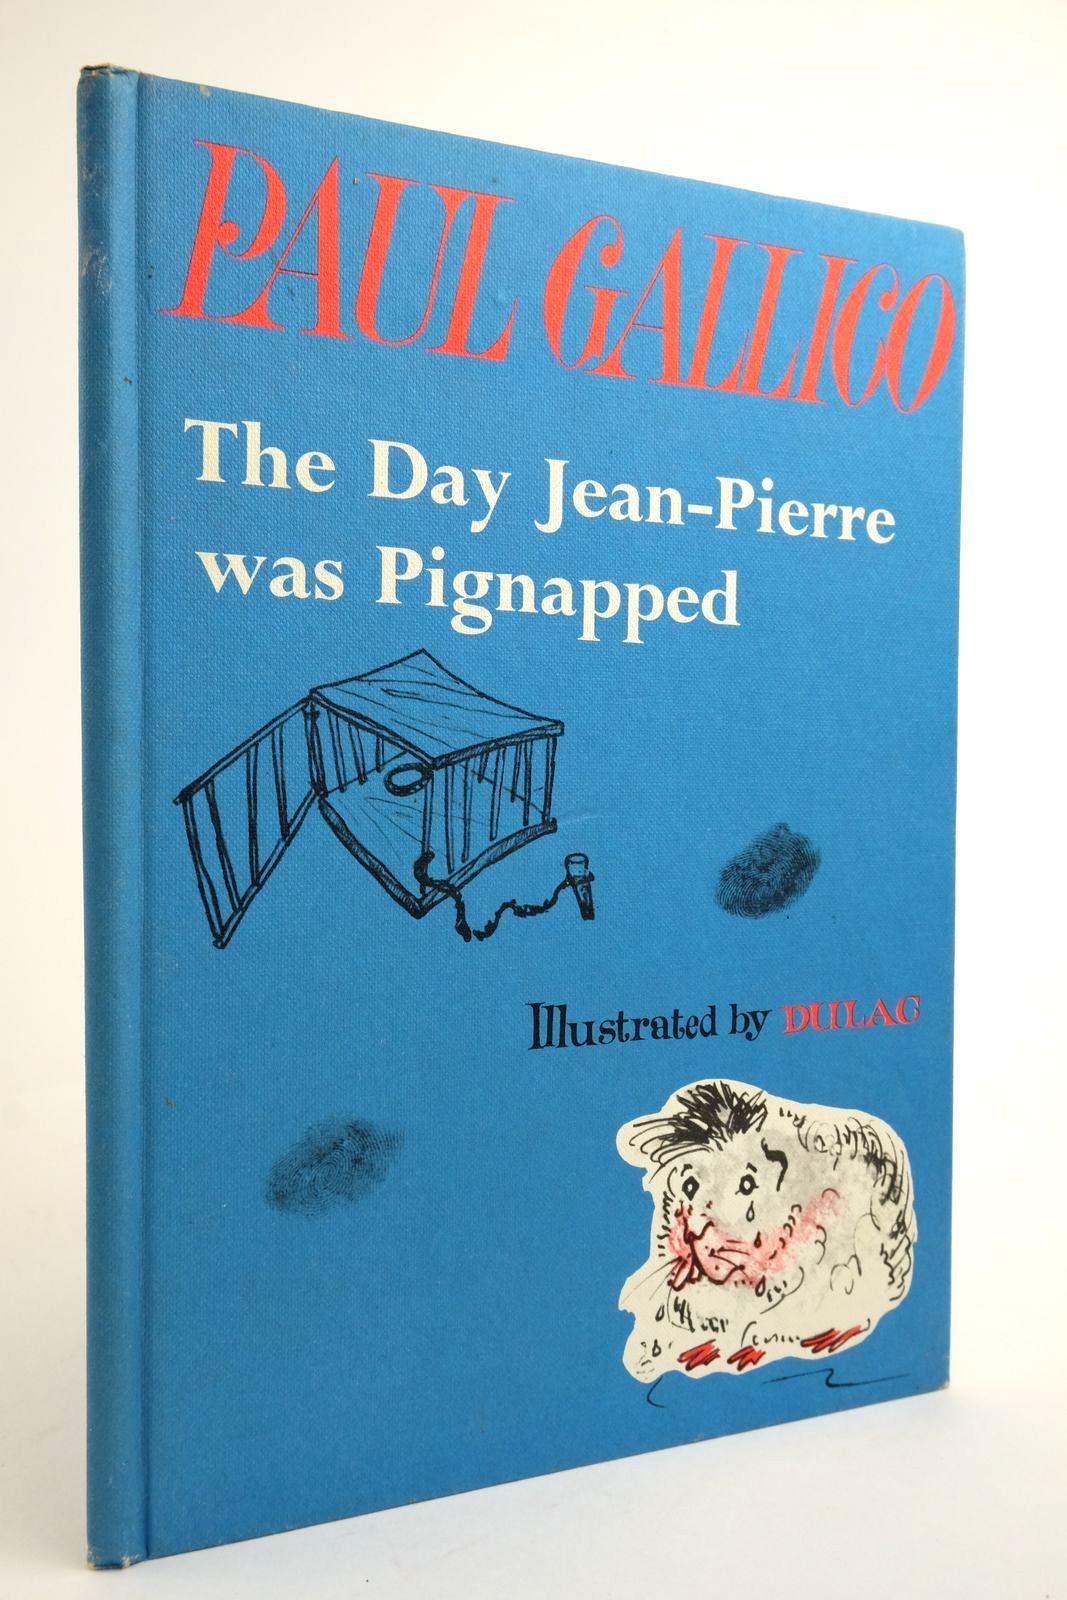 Photo of THE DAY JEAN-PIERRE WAS PIGNAPPED- Stock Number: 2135581